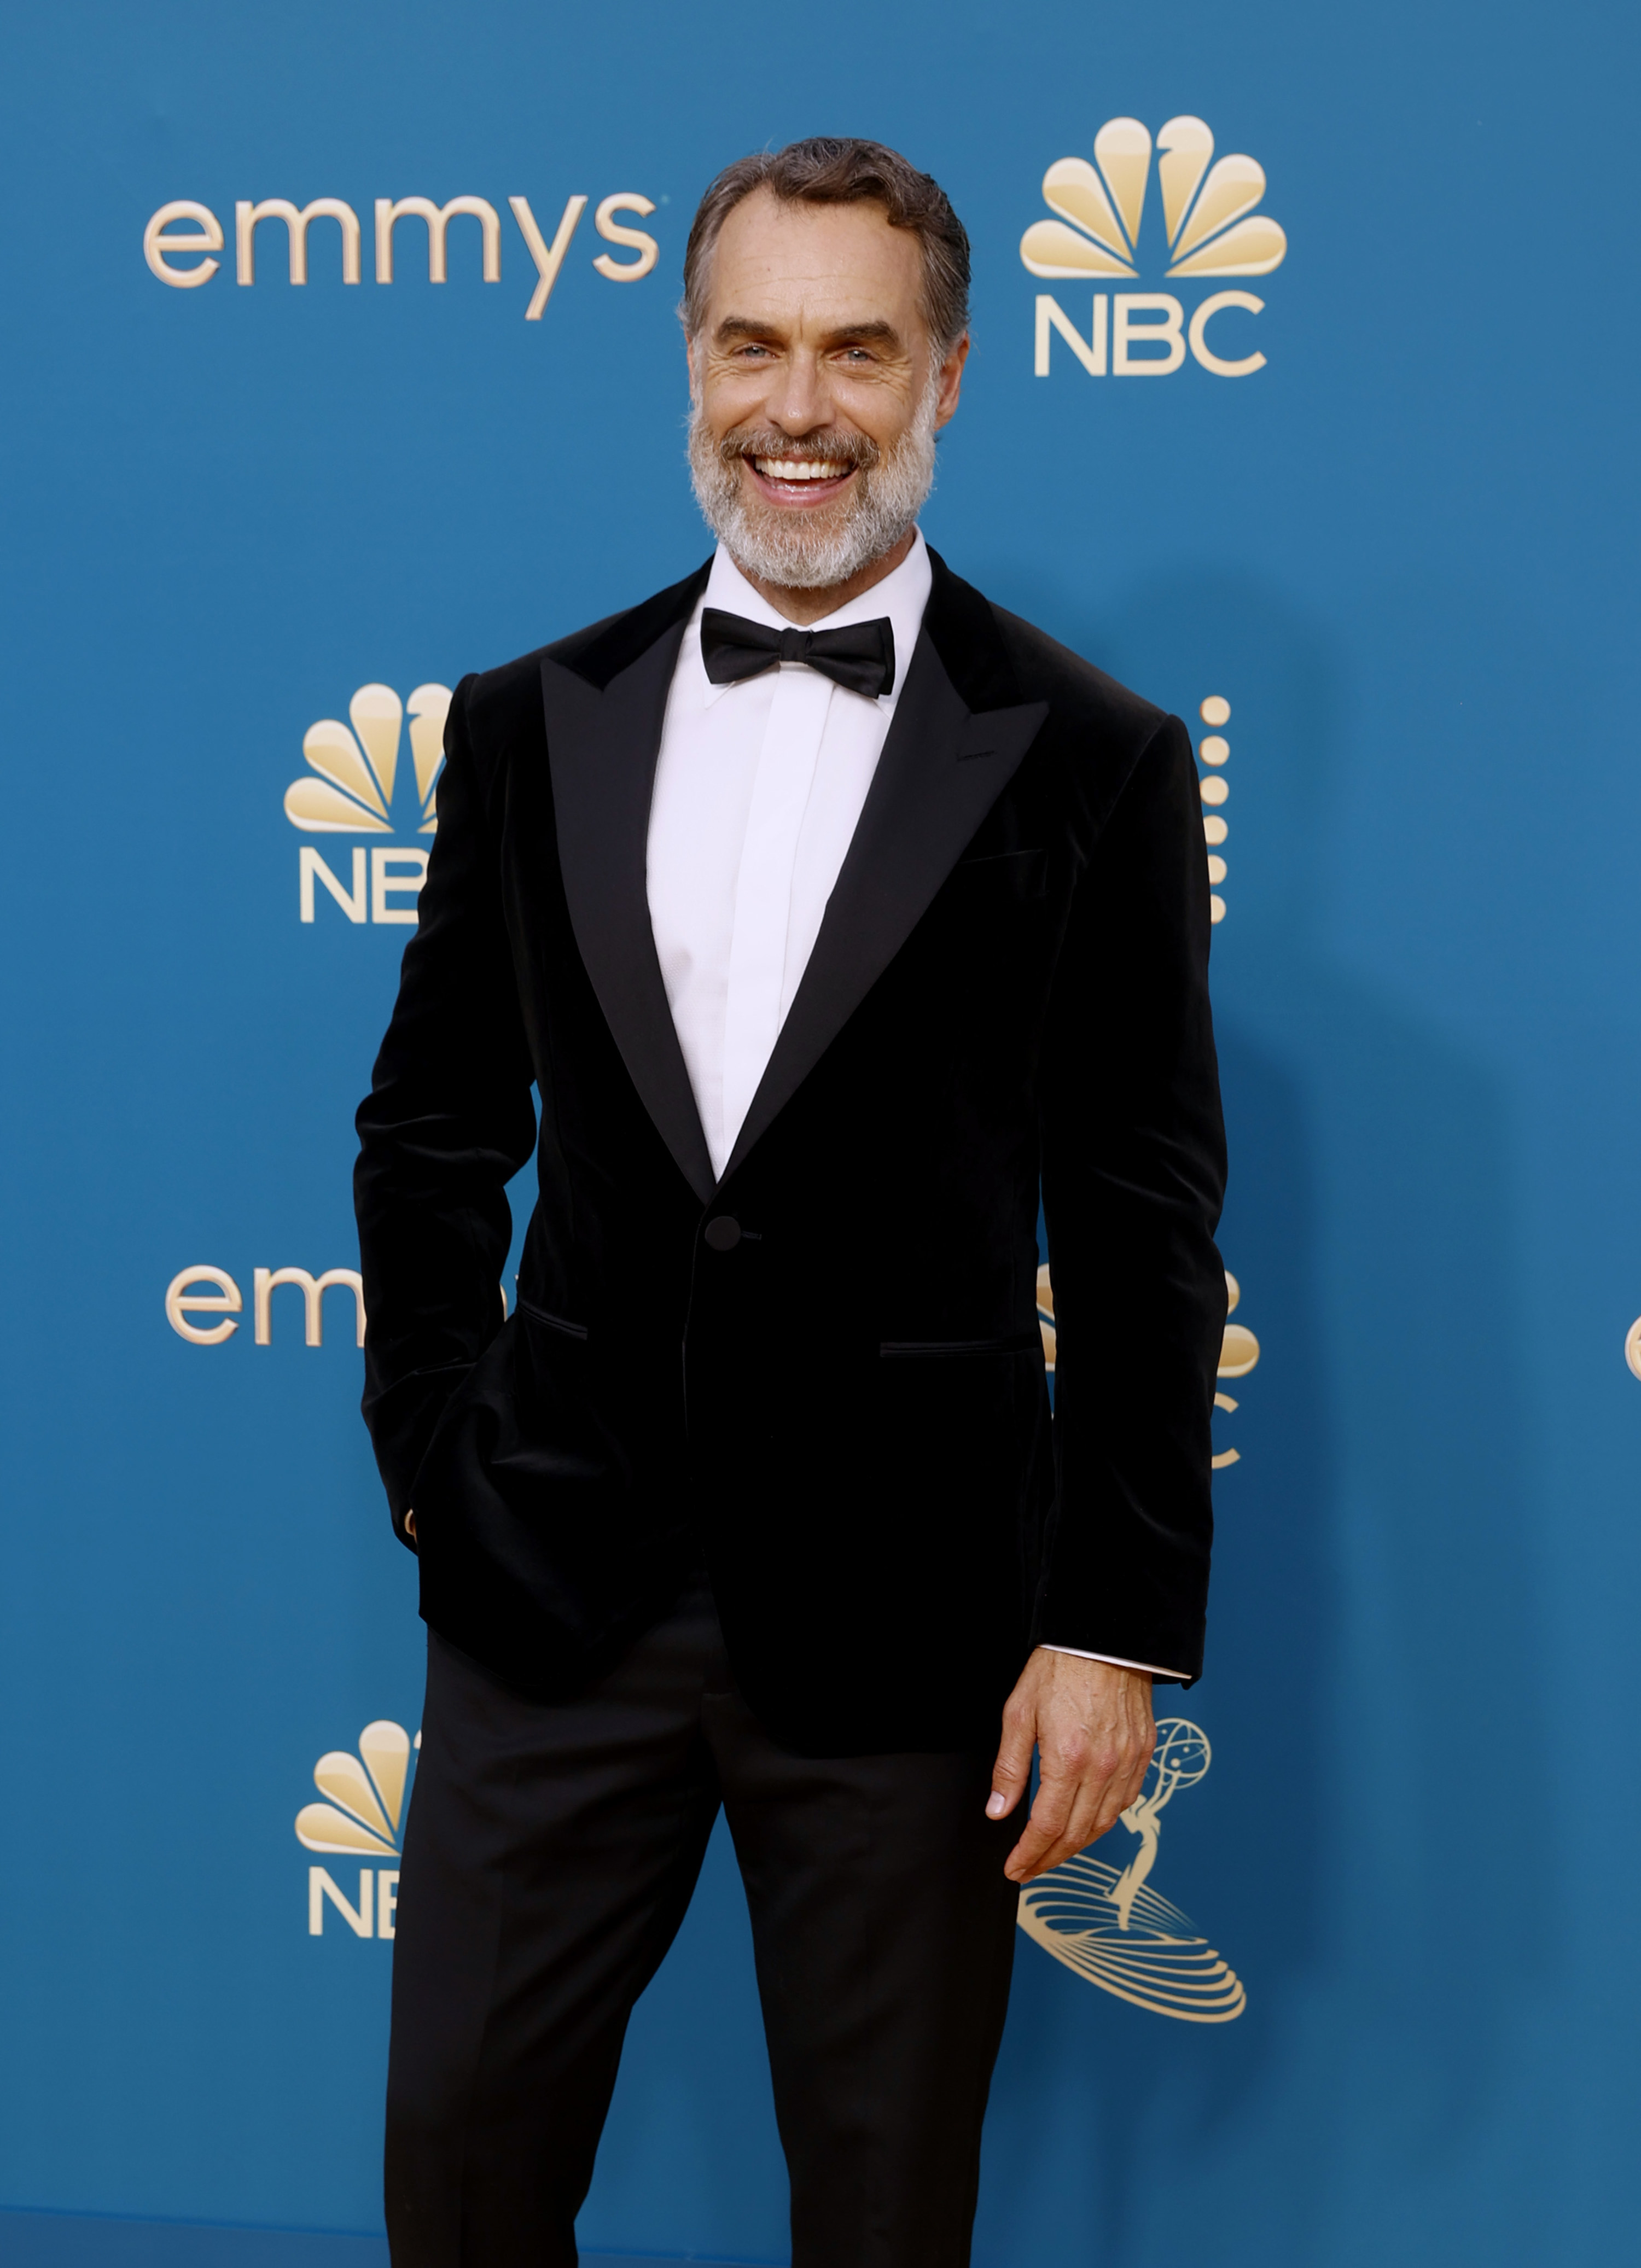 Murray smiles widely as he poses for photographers on the Emmys red carpet. Murray is wearing a tuxedo